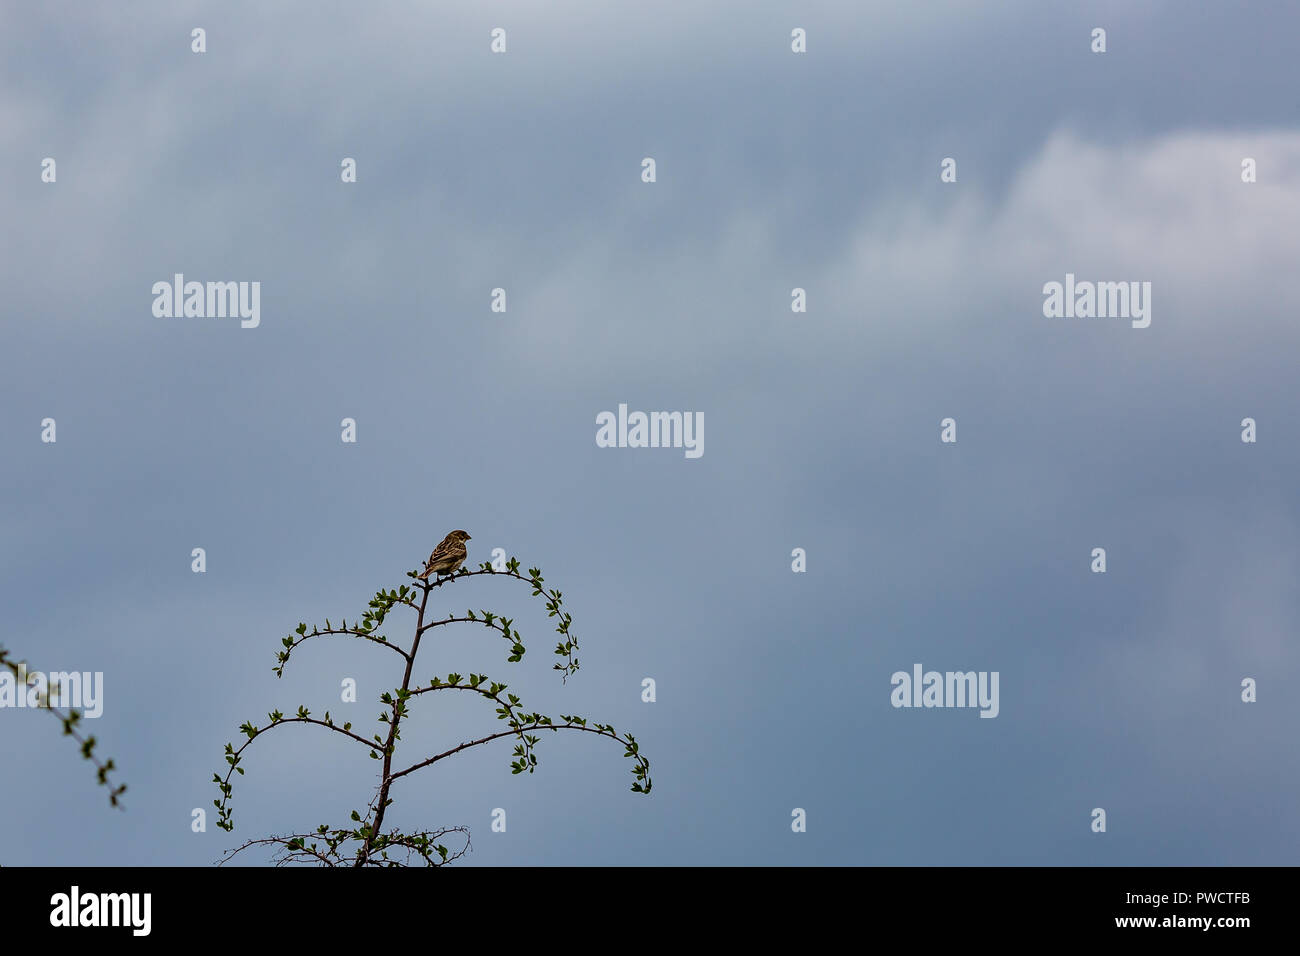 Portrait of a small brown sparrow resting on a tiny branch with green leaves. Cloudy moody blue sky in the background Stock Photo